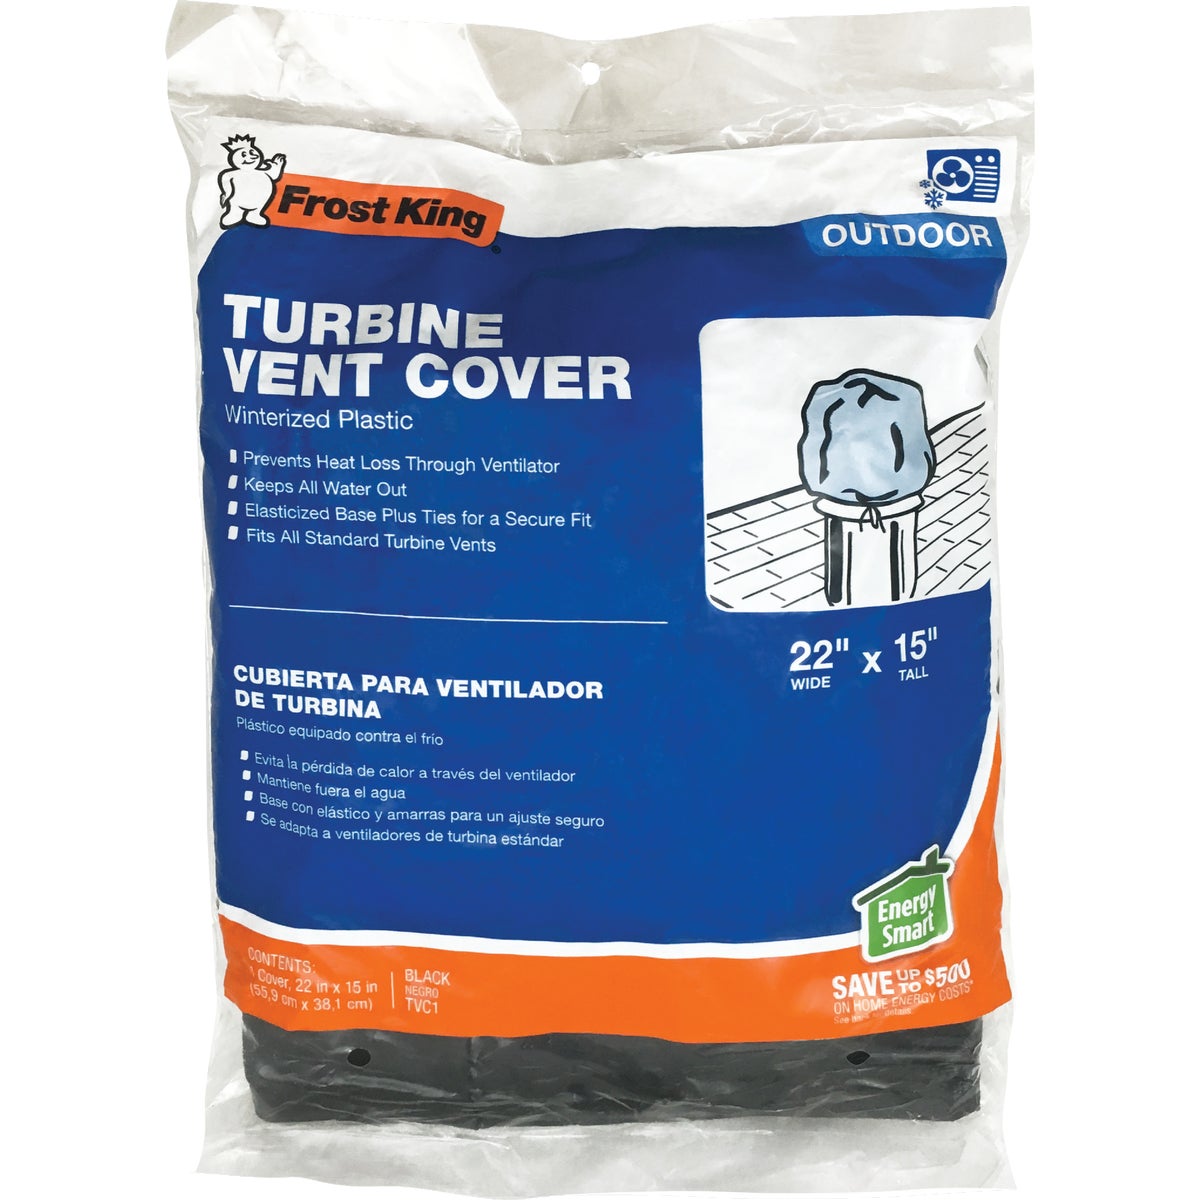 Item 101222, Frost King's winterized plastic turbine vent cover fits over your roof 